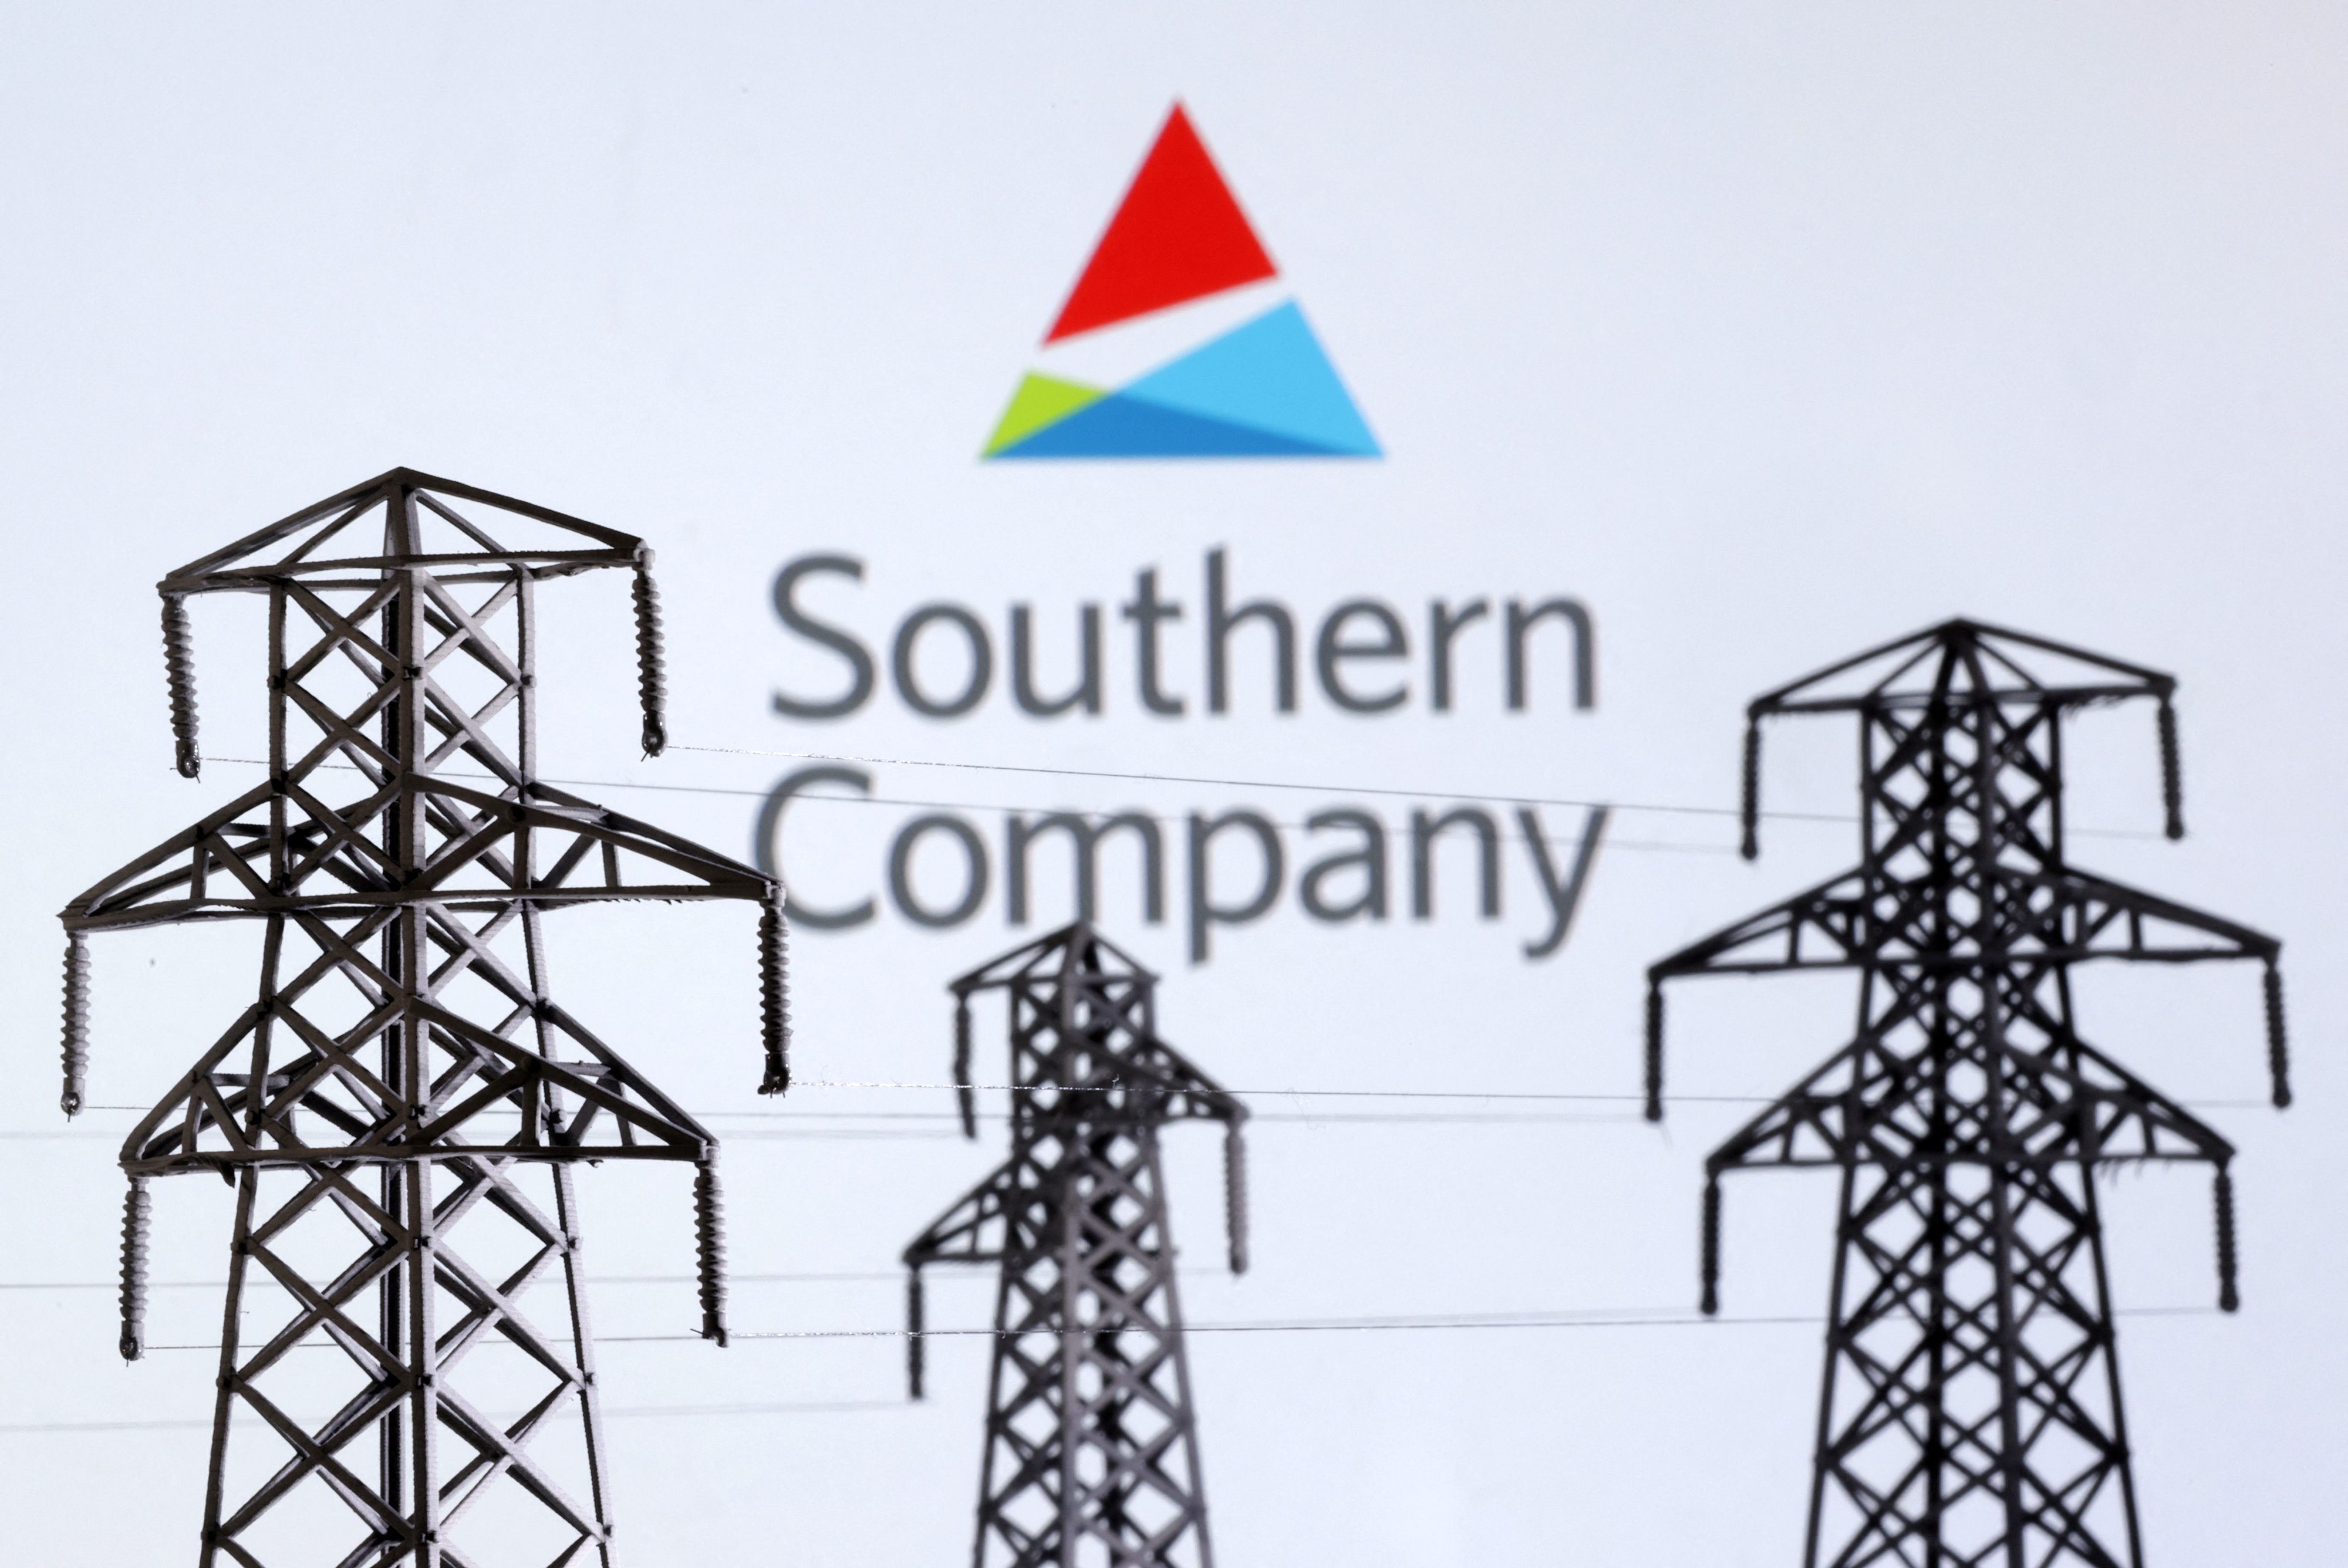 Illustration shows Electric power transmission pylon miniatures and Southern Company logo